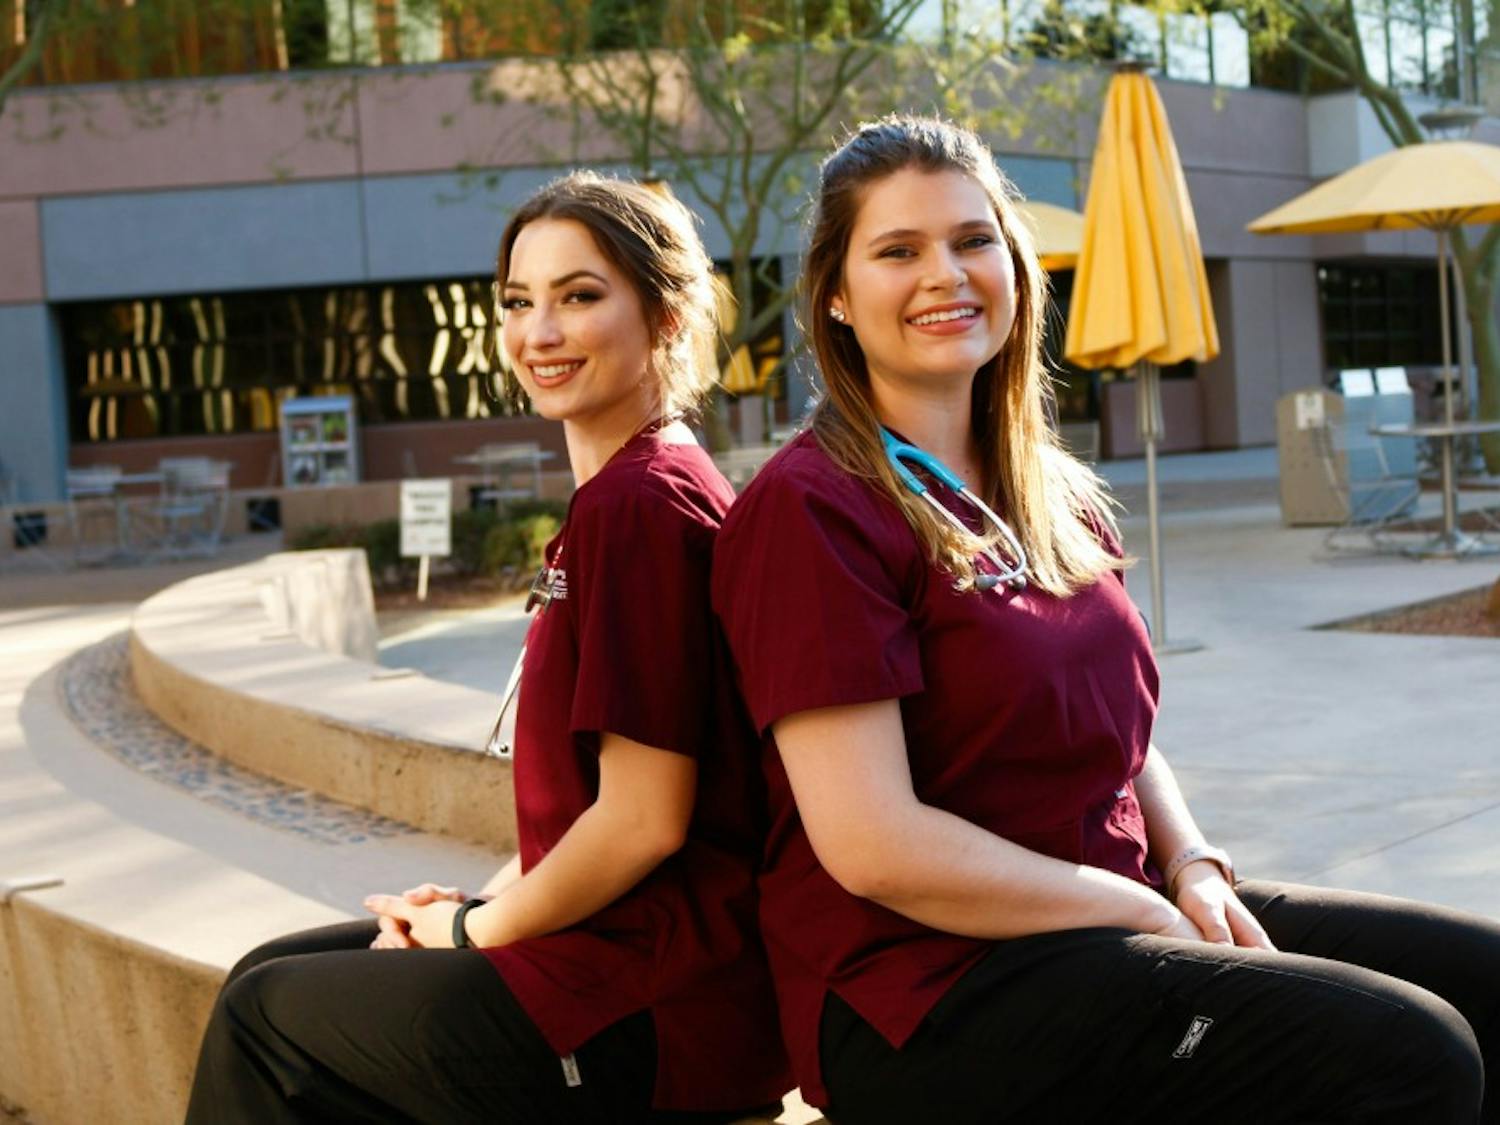 Zia Tyree (left) and&nbsp;Marina Birch (right) pose for a portrait in the courtyard of the ASU&nbsp;College of Nursing and Health Innovation.&nbsp;